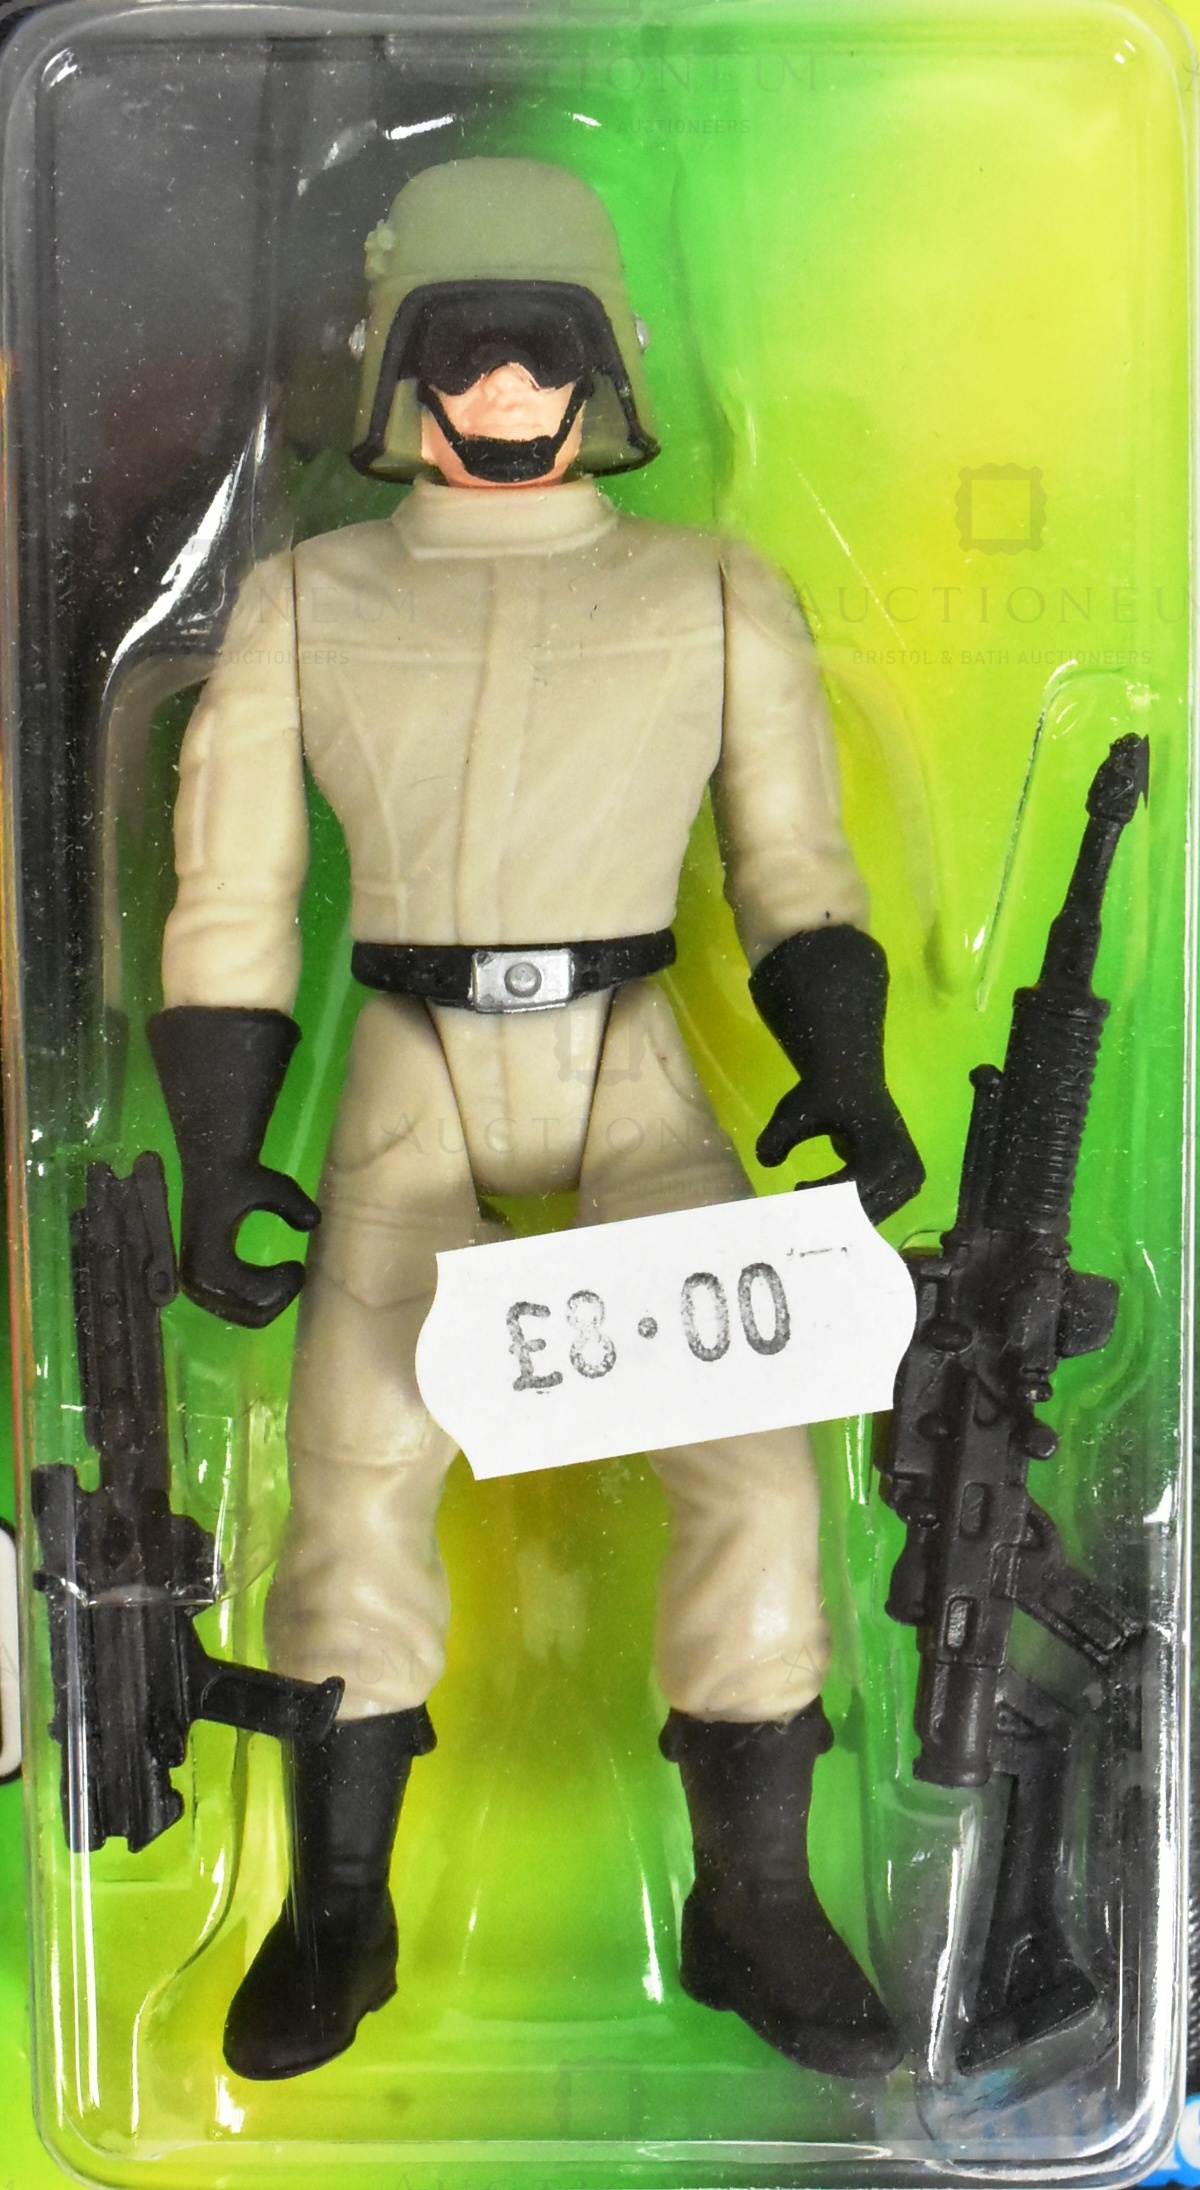 STAR WARS - ROBERT WATTS (PRODUCER) - AUTOGRAPHED ACTION FIGURE - Image 4 of 5